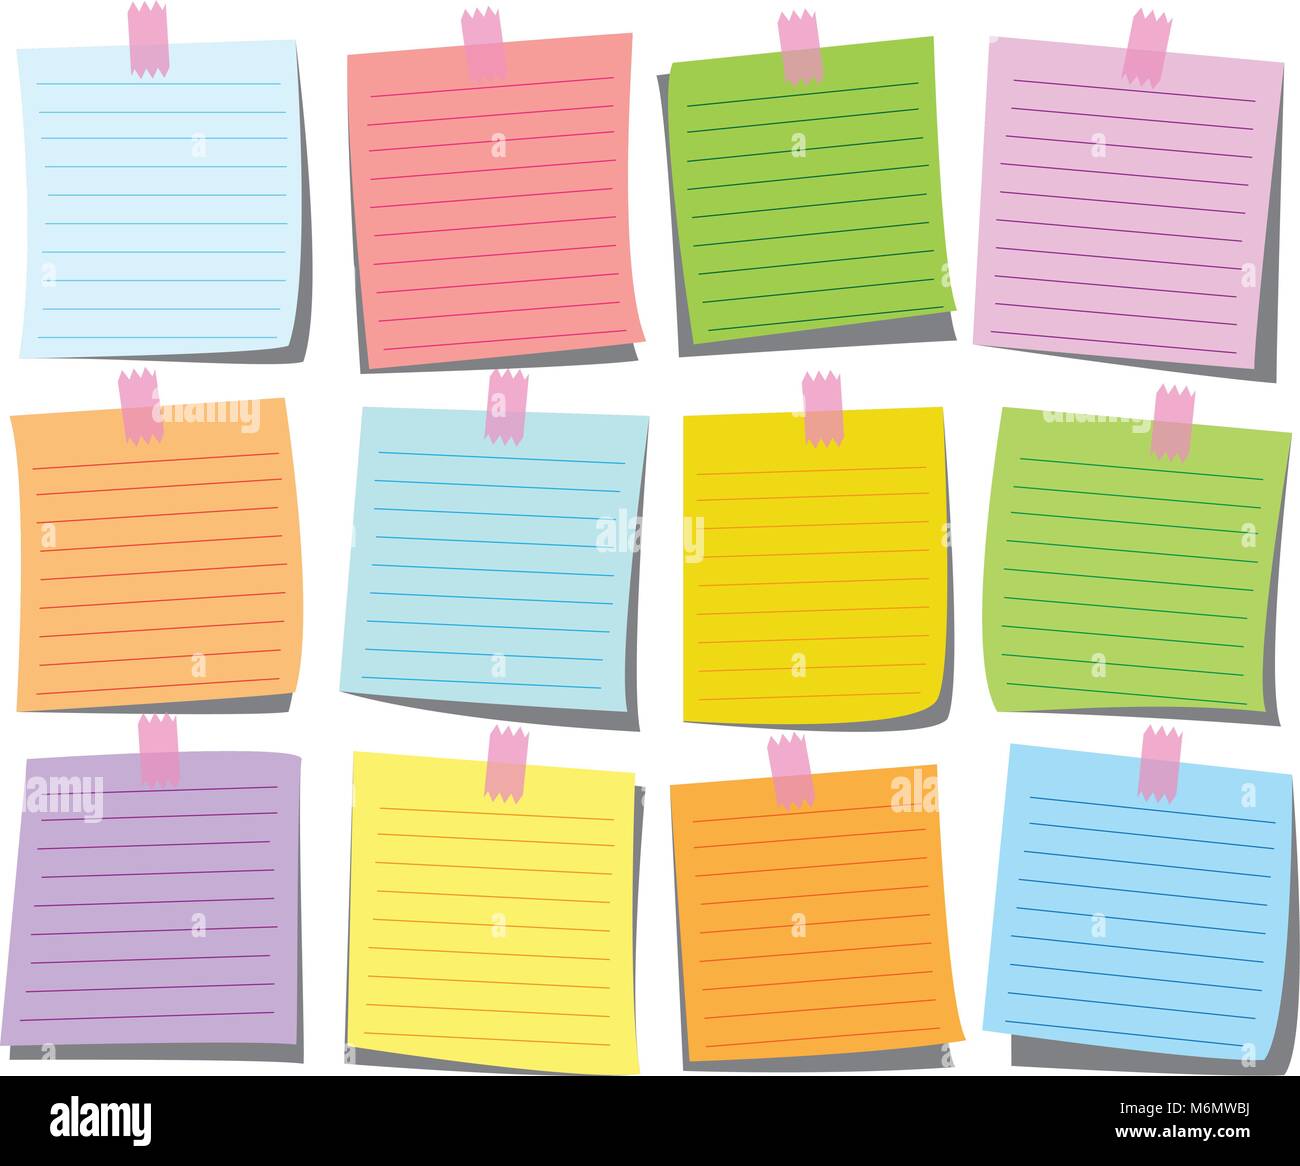 Premium Vector  Colorful sticky note paper attached to board for memory  notations, messages or tasks